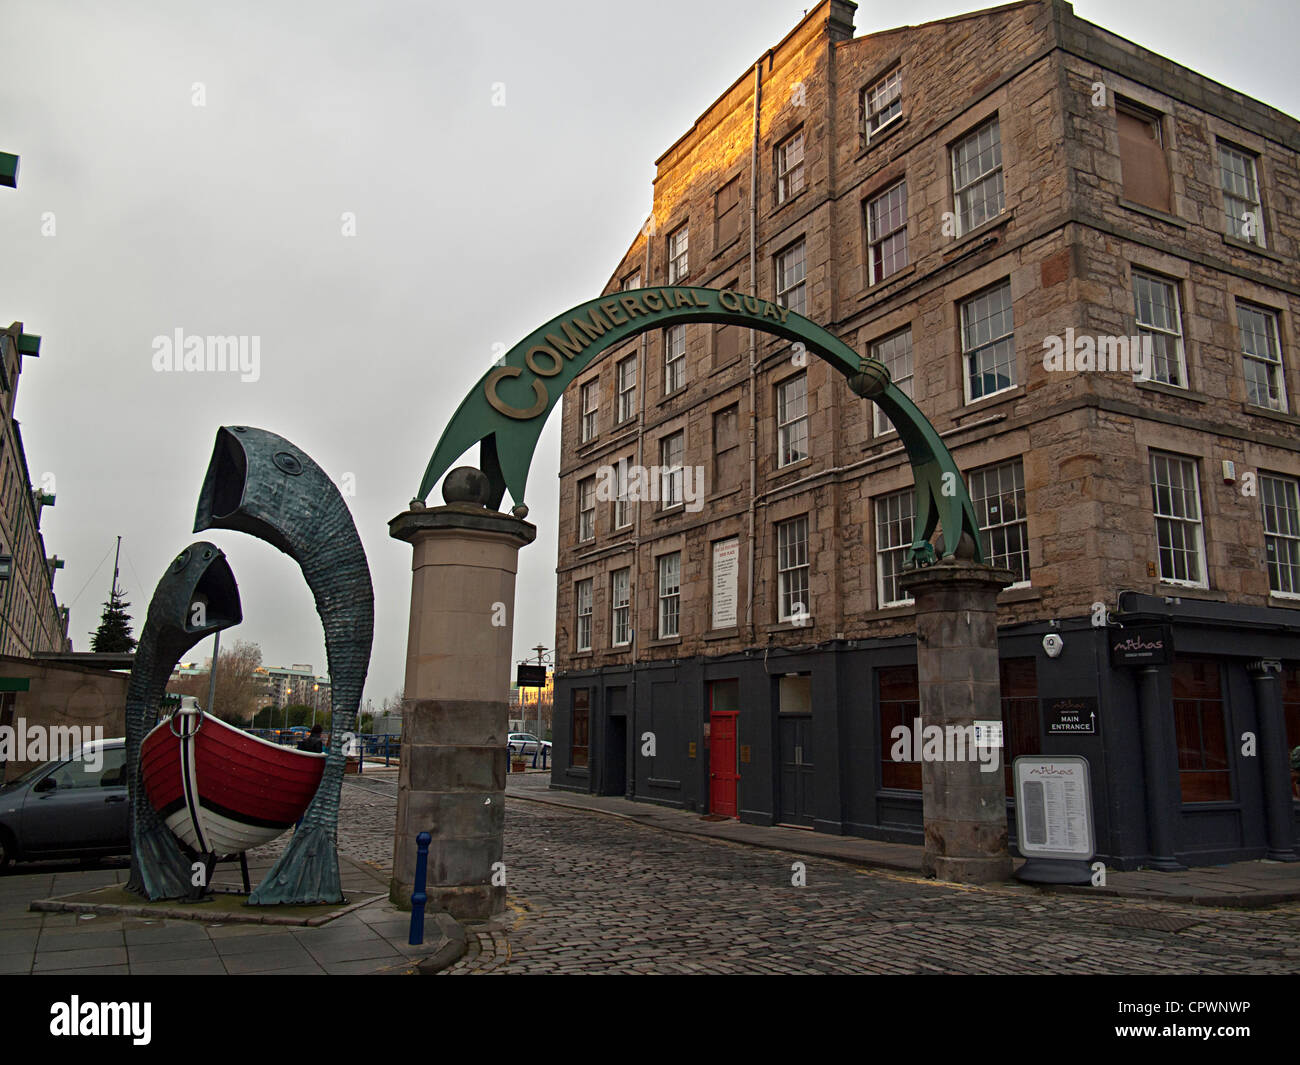 Comercial quay in leith district Stock Photo